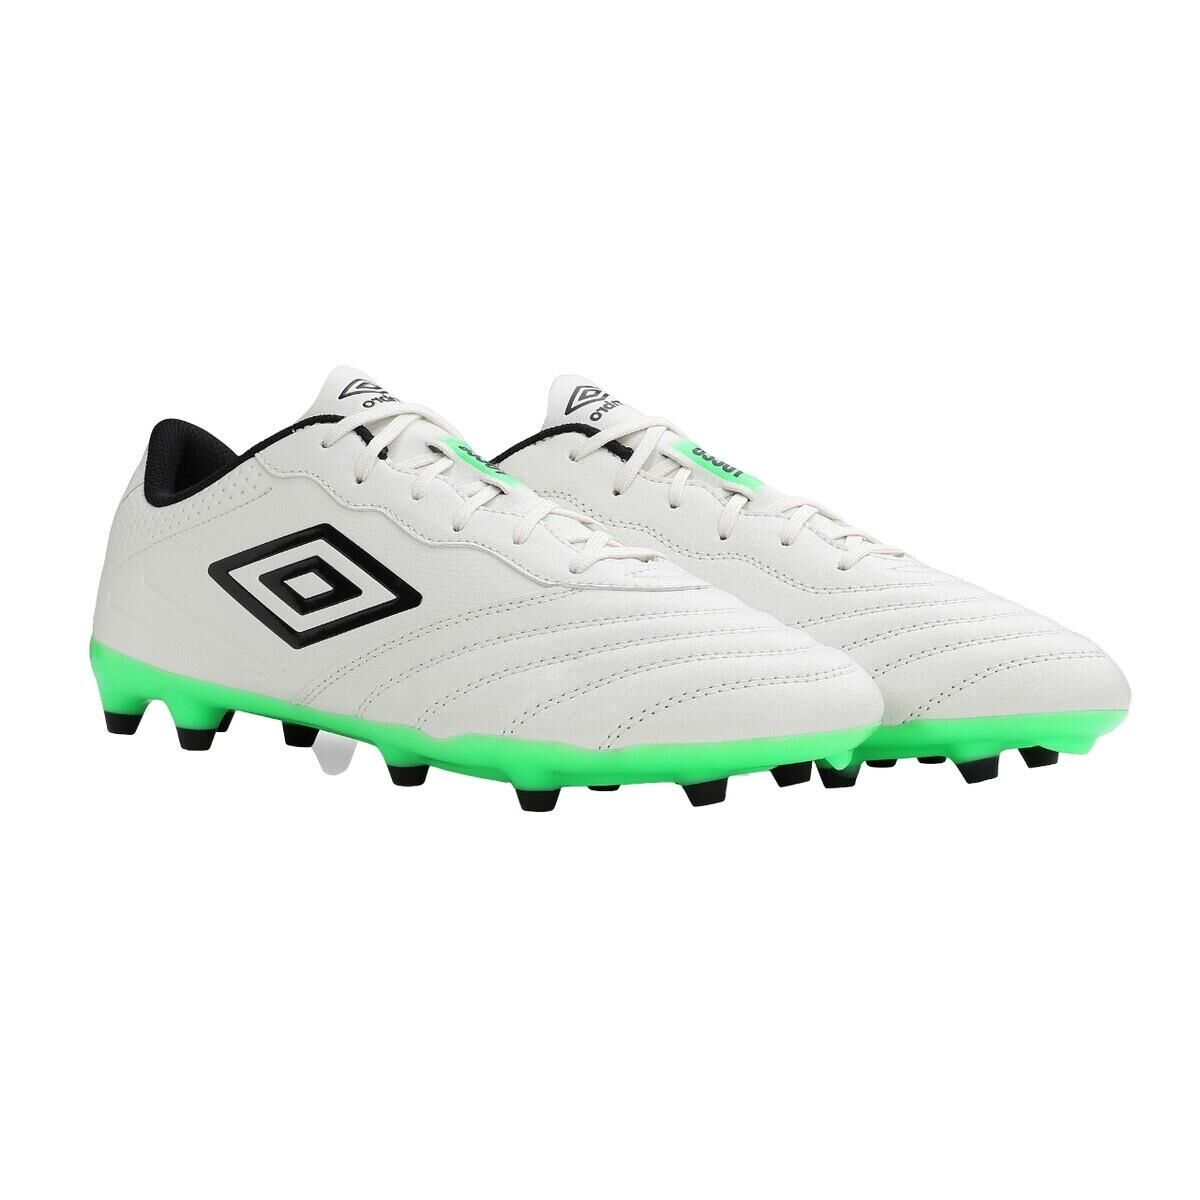 UMBRO Mens Tocco III Club Leather Football Boots (White/Black/Andean Toucan)